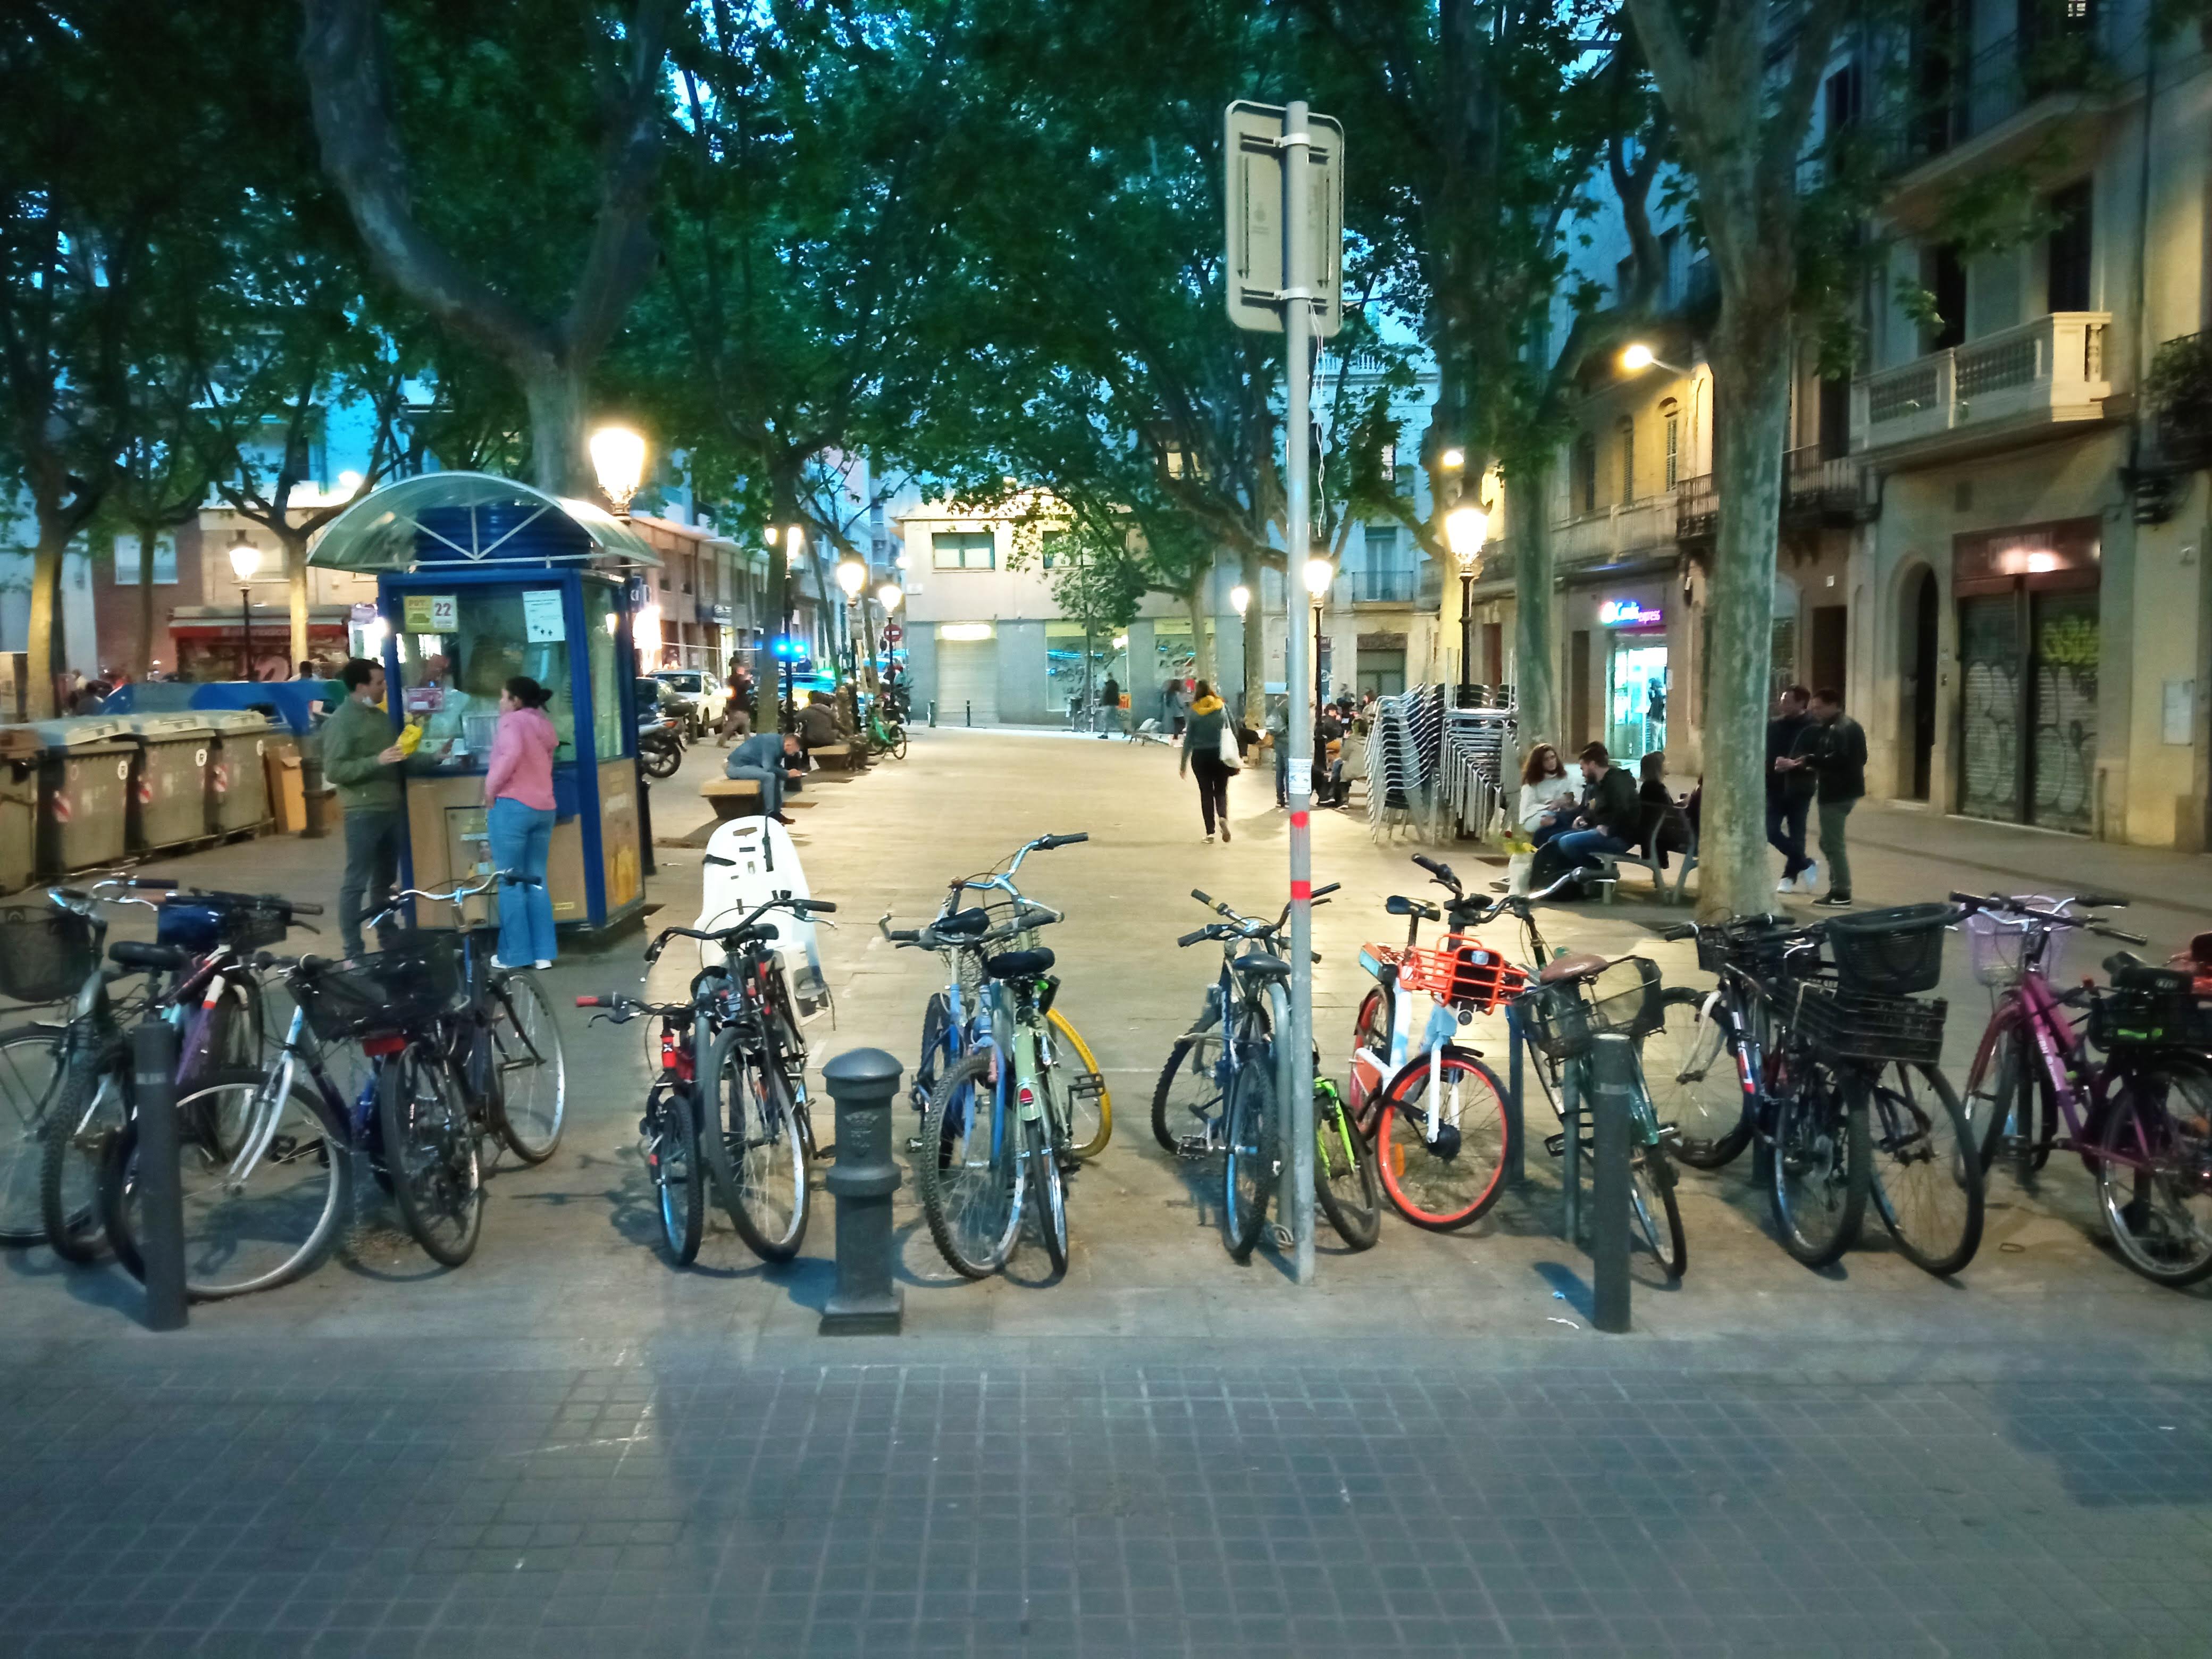 Bicycle Parking Use Patterns, Occupancy and Rotation Rates in the Streets of Barcelona